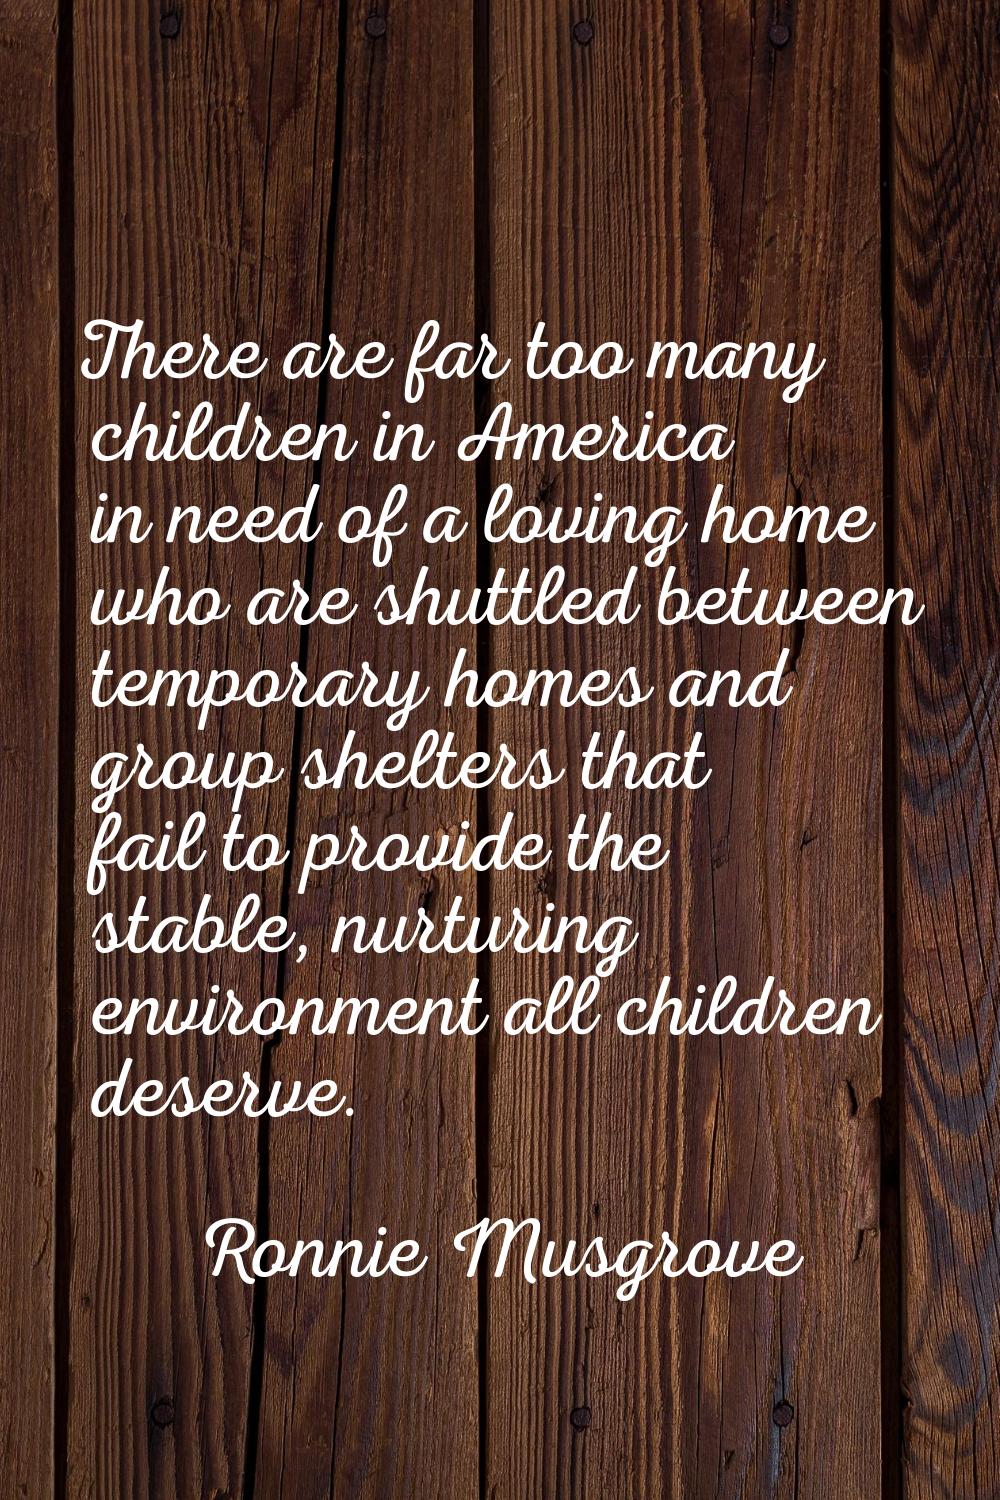 There are far too many children in America in need of a loving home who are shuttled between tempor